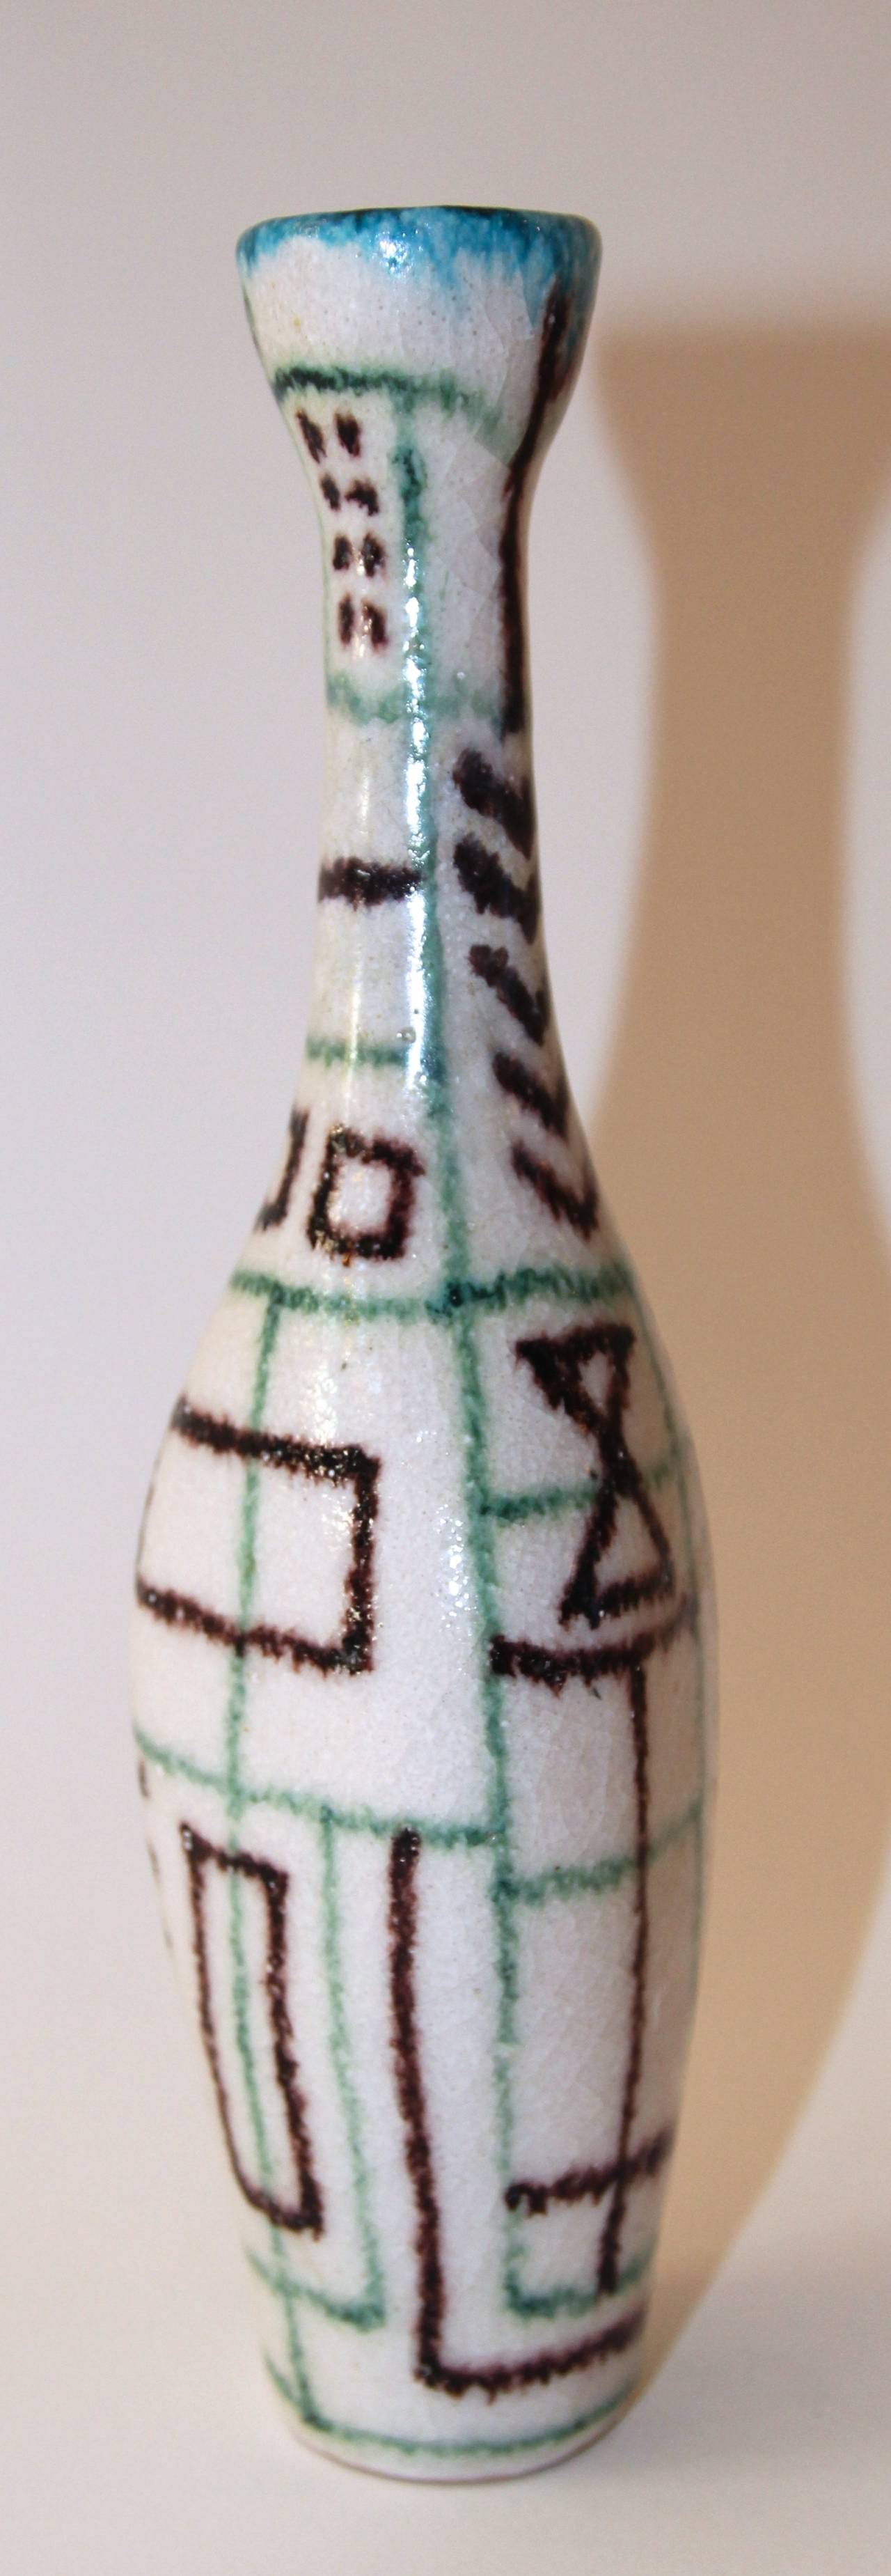 Guido Gambone (1909-1969), Bottle, 
Glazed earthenware,
Geometric decor, 
Signed and stamped: Gambone under the base, 
Italy, 1960.

Measures: Height 22 cm, diameter 3 cm.

Guido Gambone (1909 – 1969) is one of the most important and influential